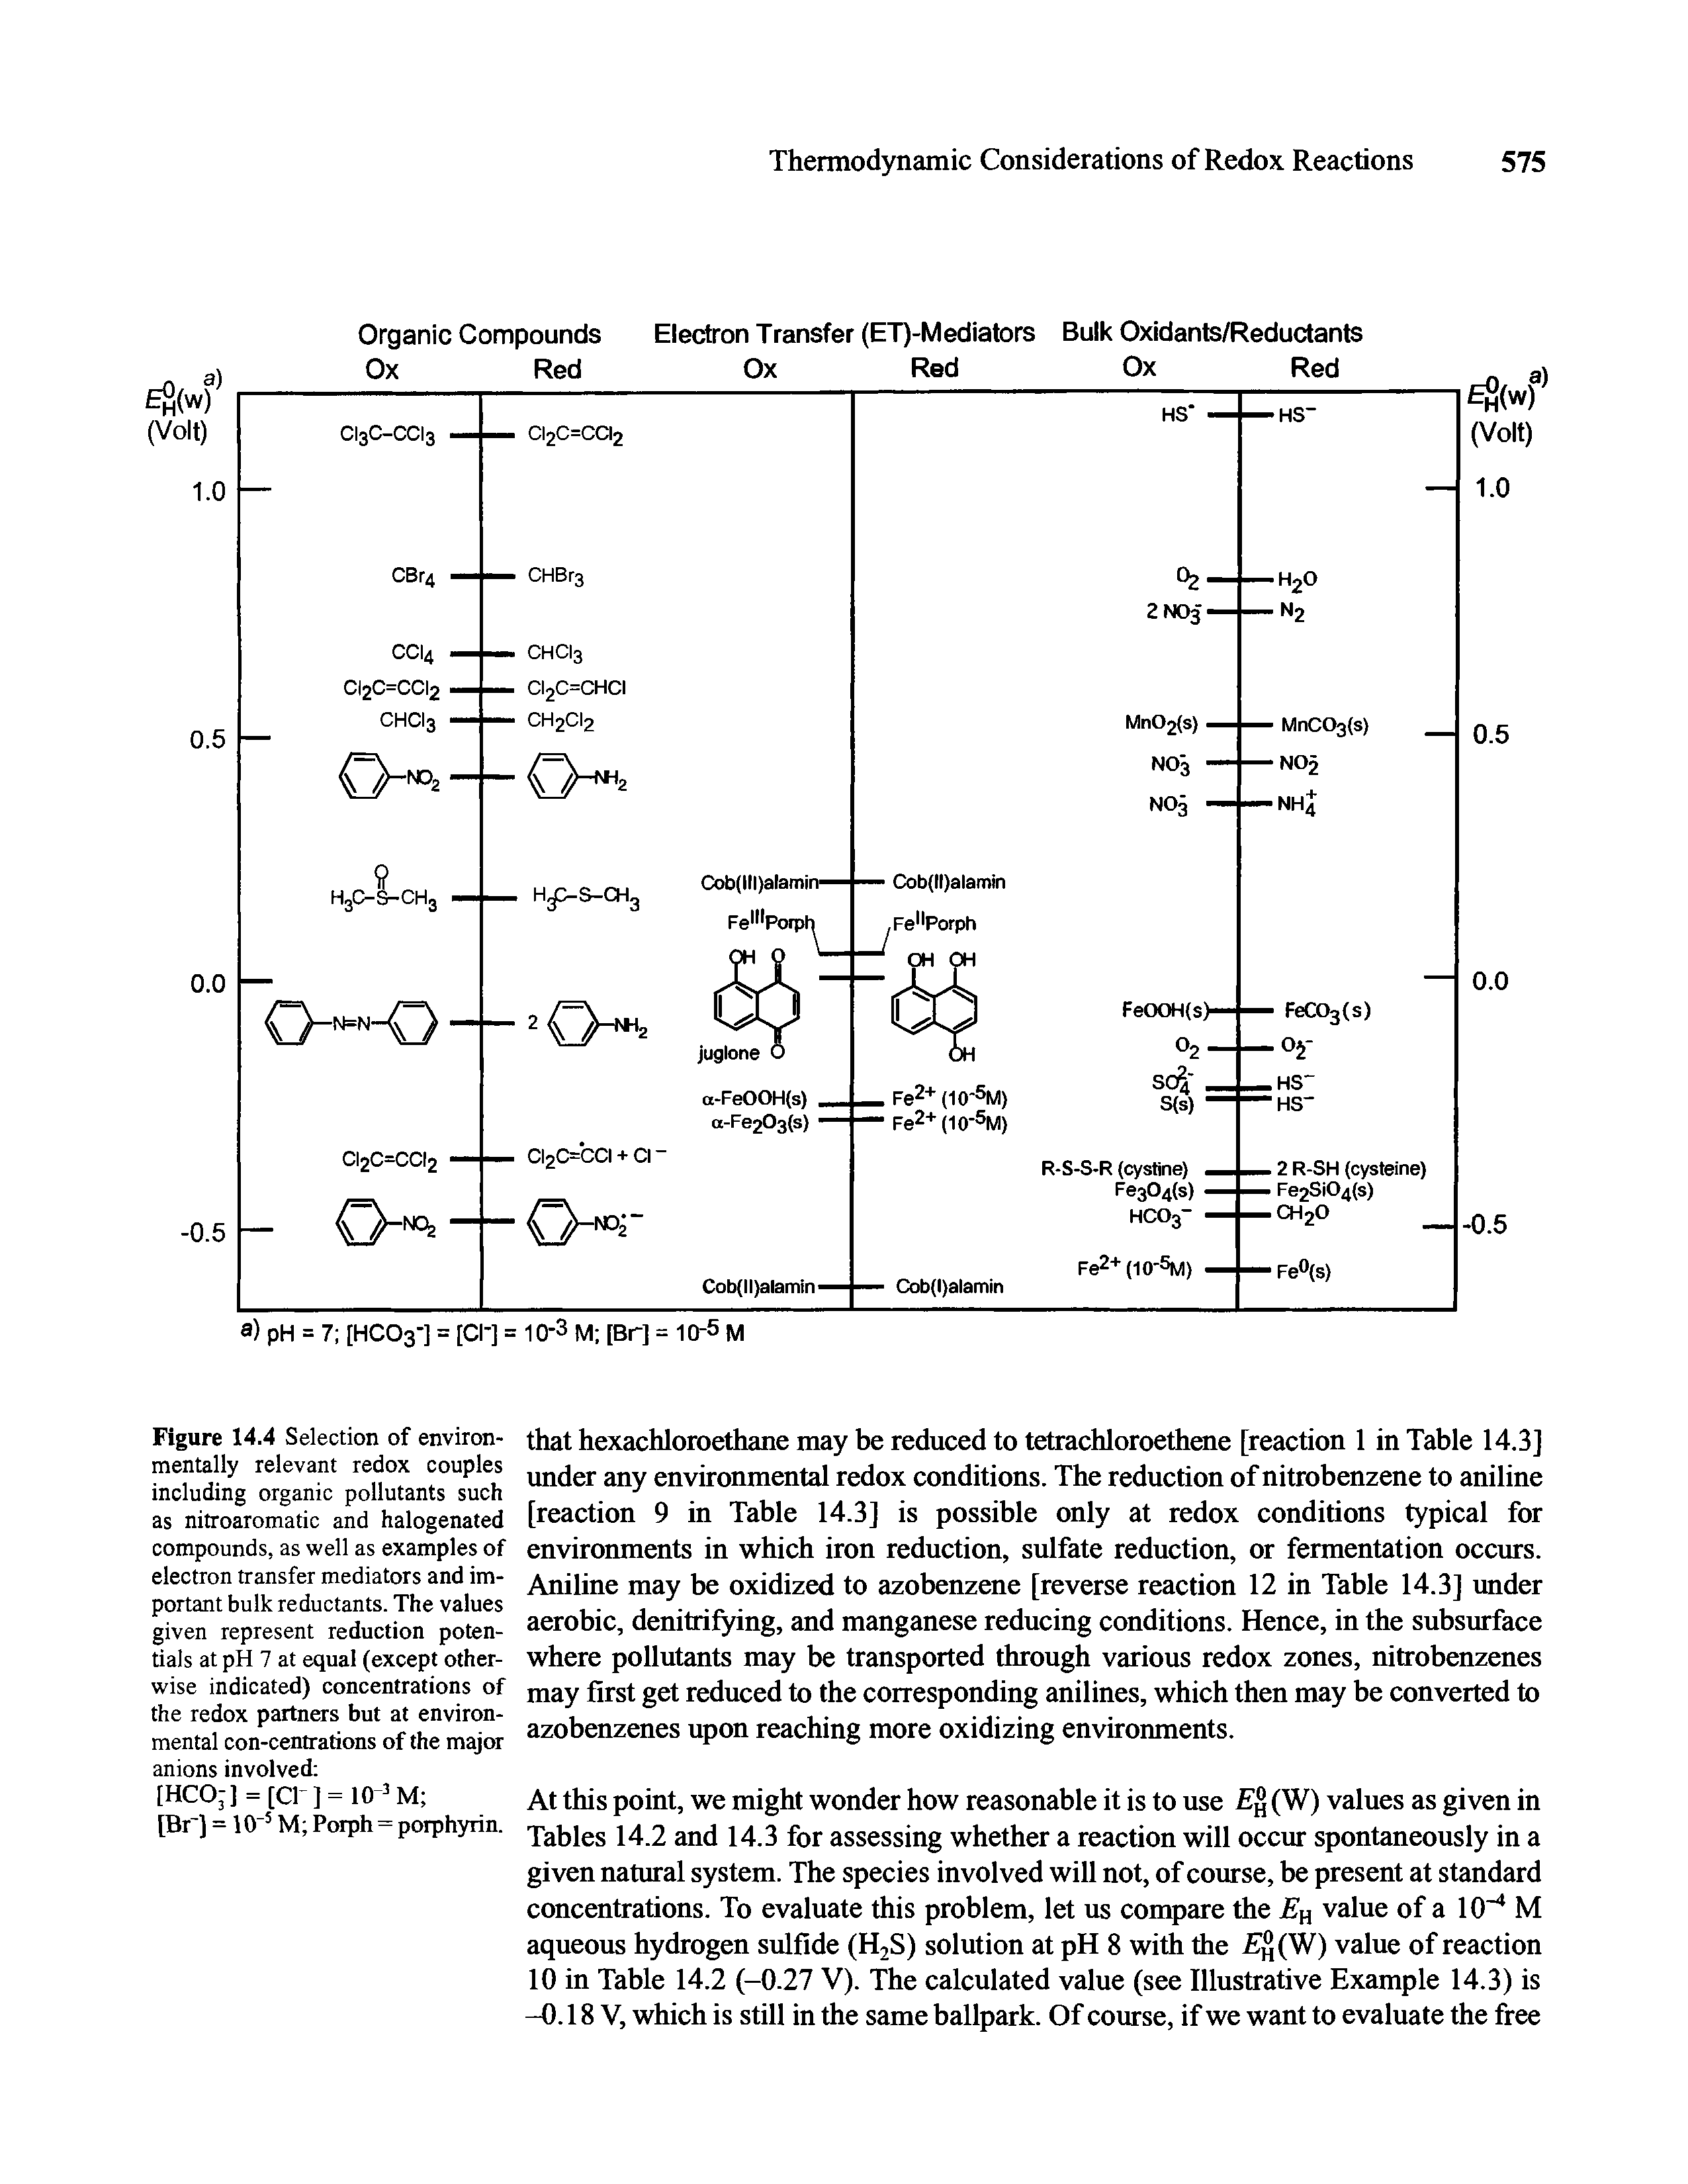 Figure 14.4 Selection of environmentally relevant redox couples including organic pollutants such as nitroaromatic and halogenated compounds, as well as examples of electron transfer mediators and important bulk reductants. The values given represent reduction potentials at pH 7 at equal (except otherwise indicated) concentrations of the redox partners but at environmental con-centrations of the major anions involved ...